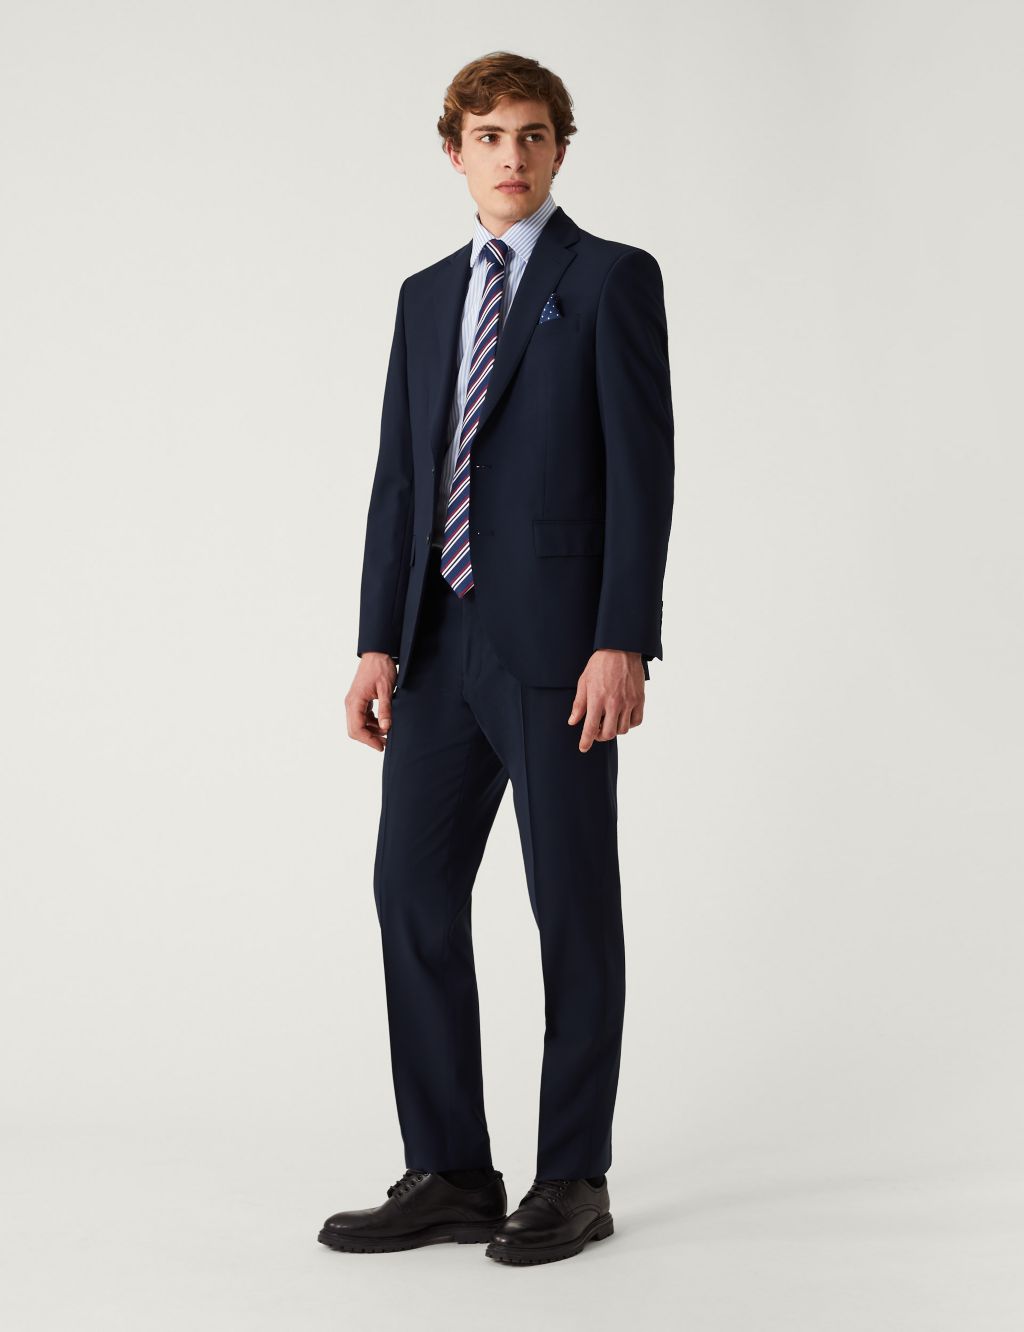 The Ultimate Regular Fit Suit image 1